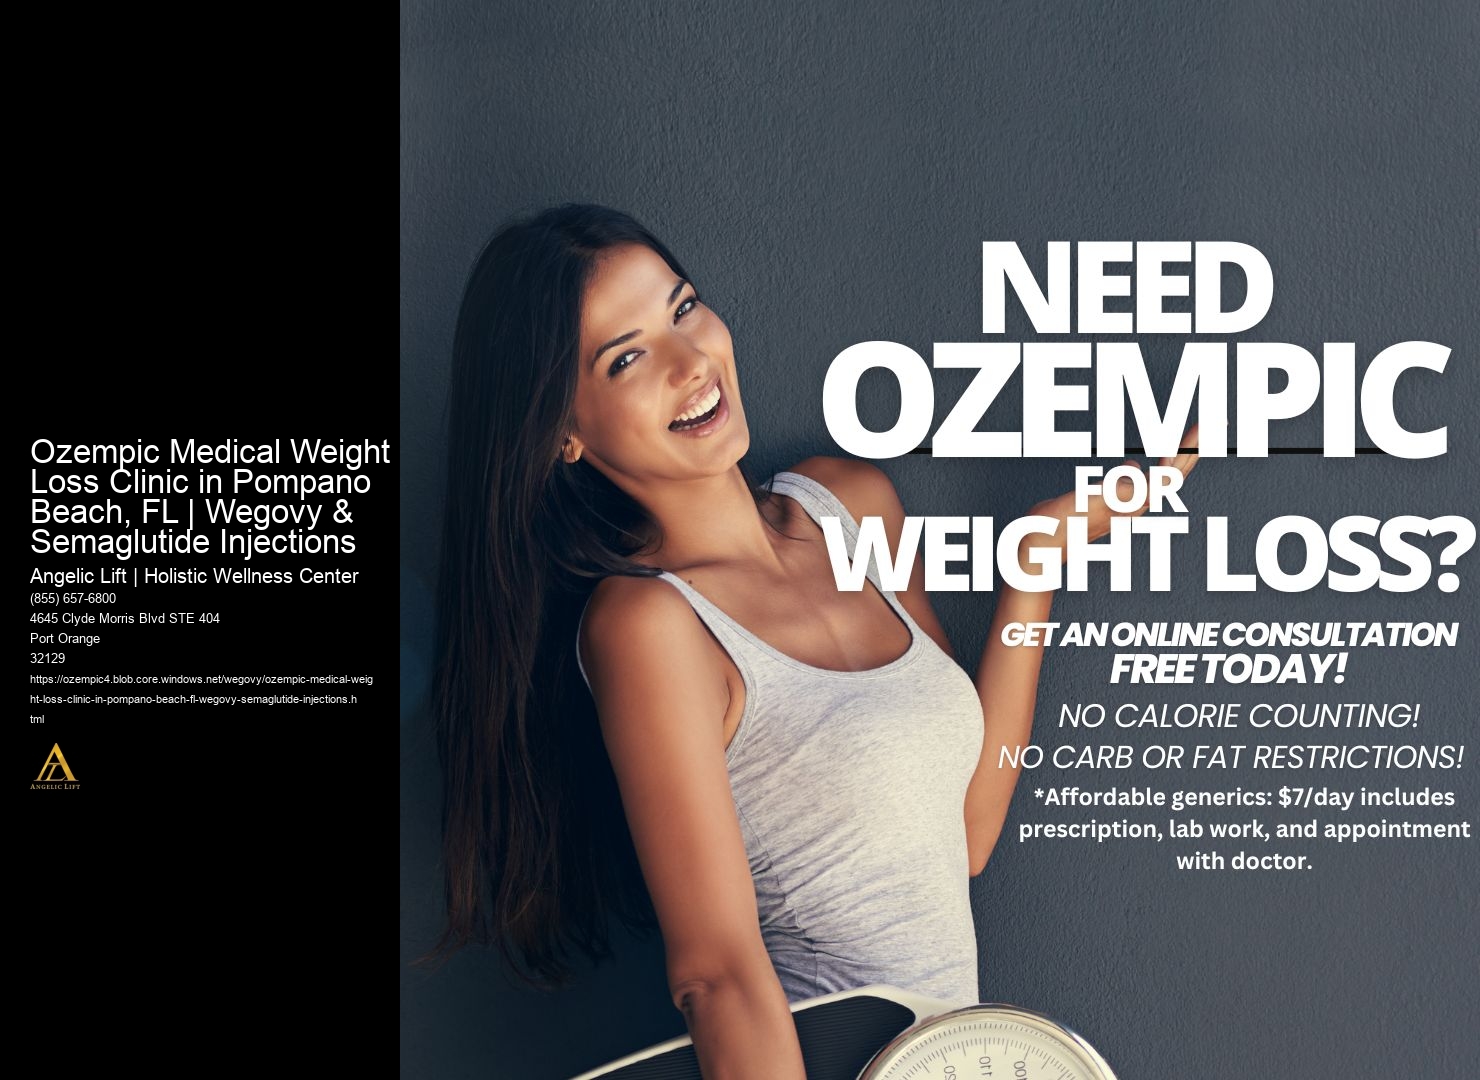 Ozempic Medical Weight Loss Clinic in Pompano Beach, FL | Wegovy & Semaglutide Injections